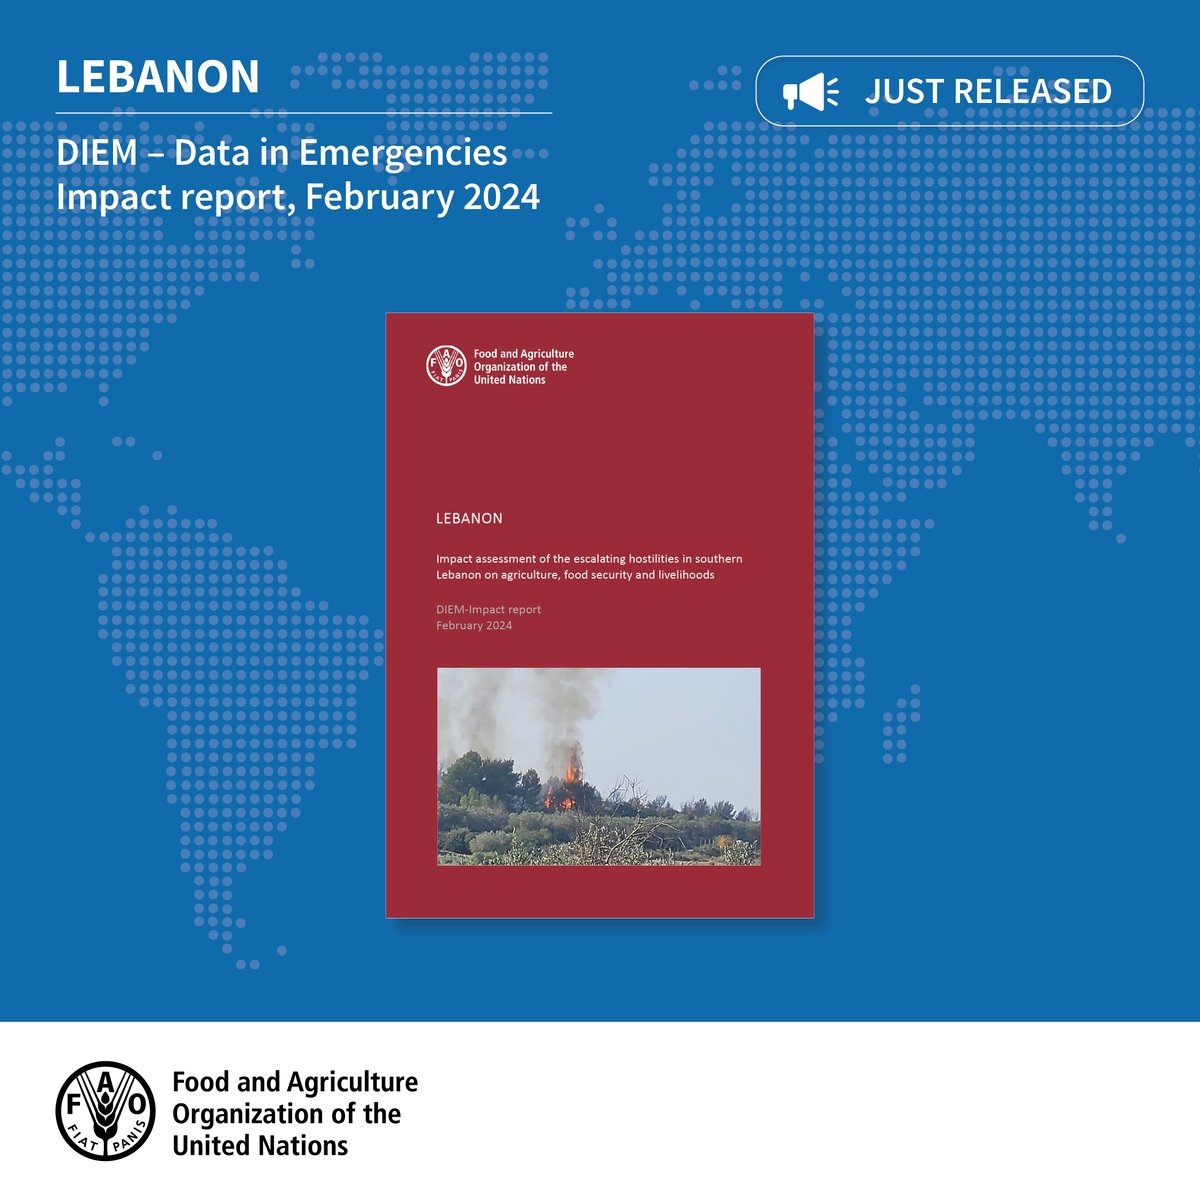 Computer-assisted telephone interviews conducted through the #DataInEmergencies Monitoring System triangulated with maps uncovered the impact of the escalation of hostilities in southern Lebanon.

Learn more in this just released DIEM-Impact report 👉bit.ly/431RUMl